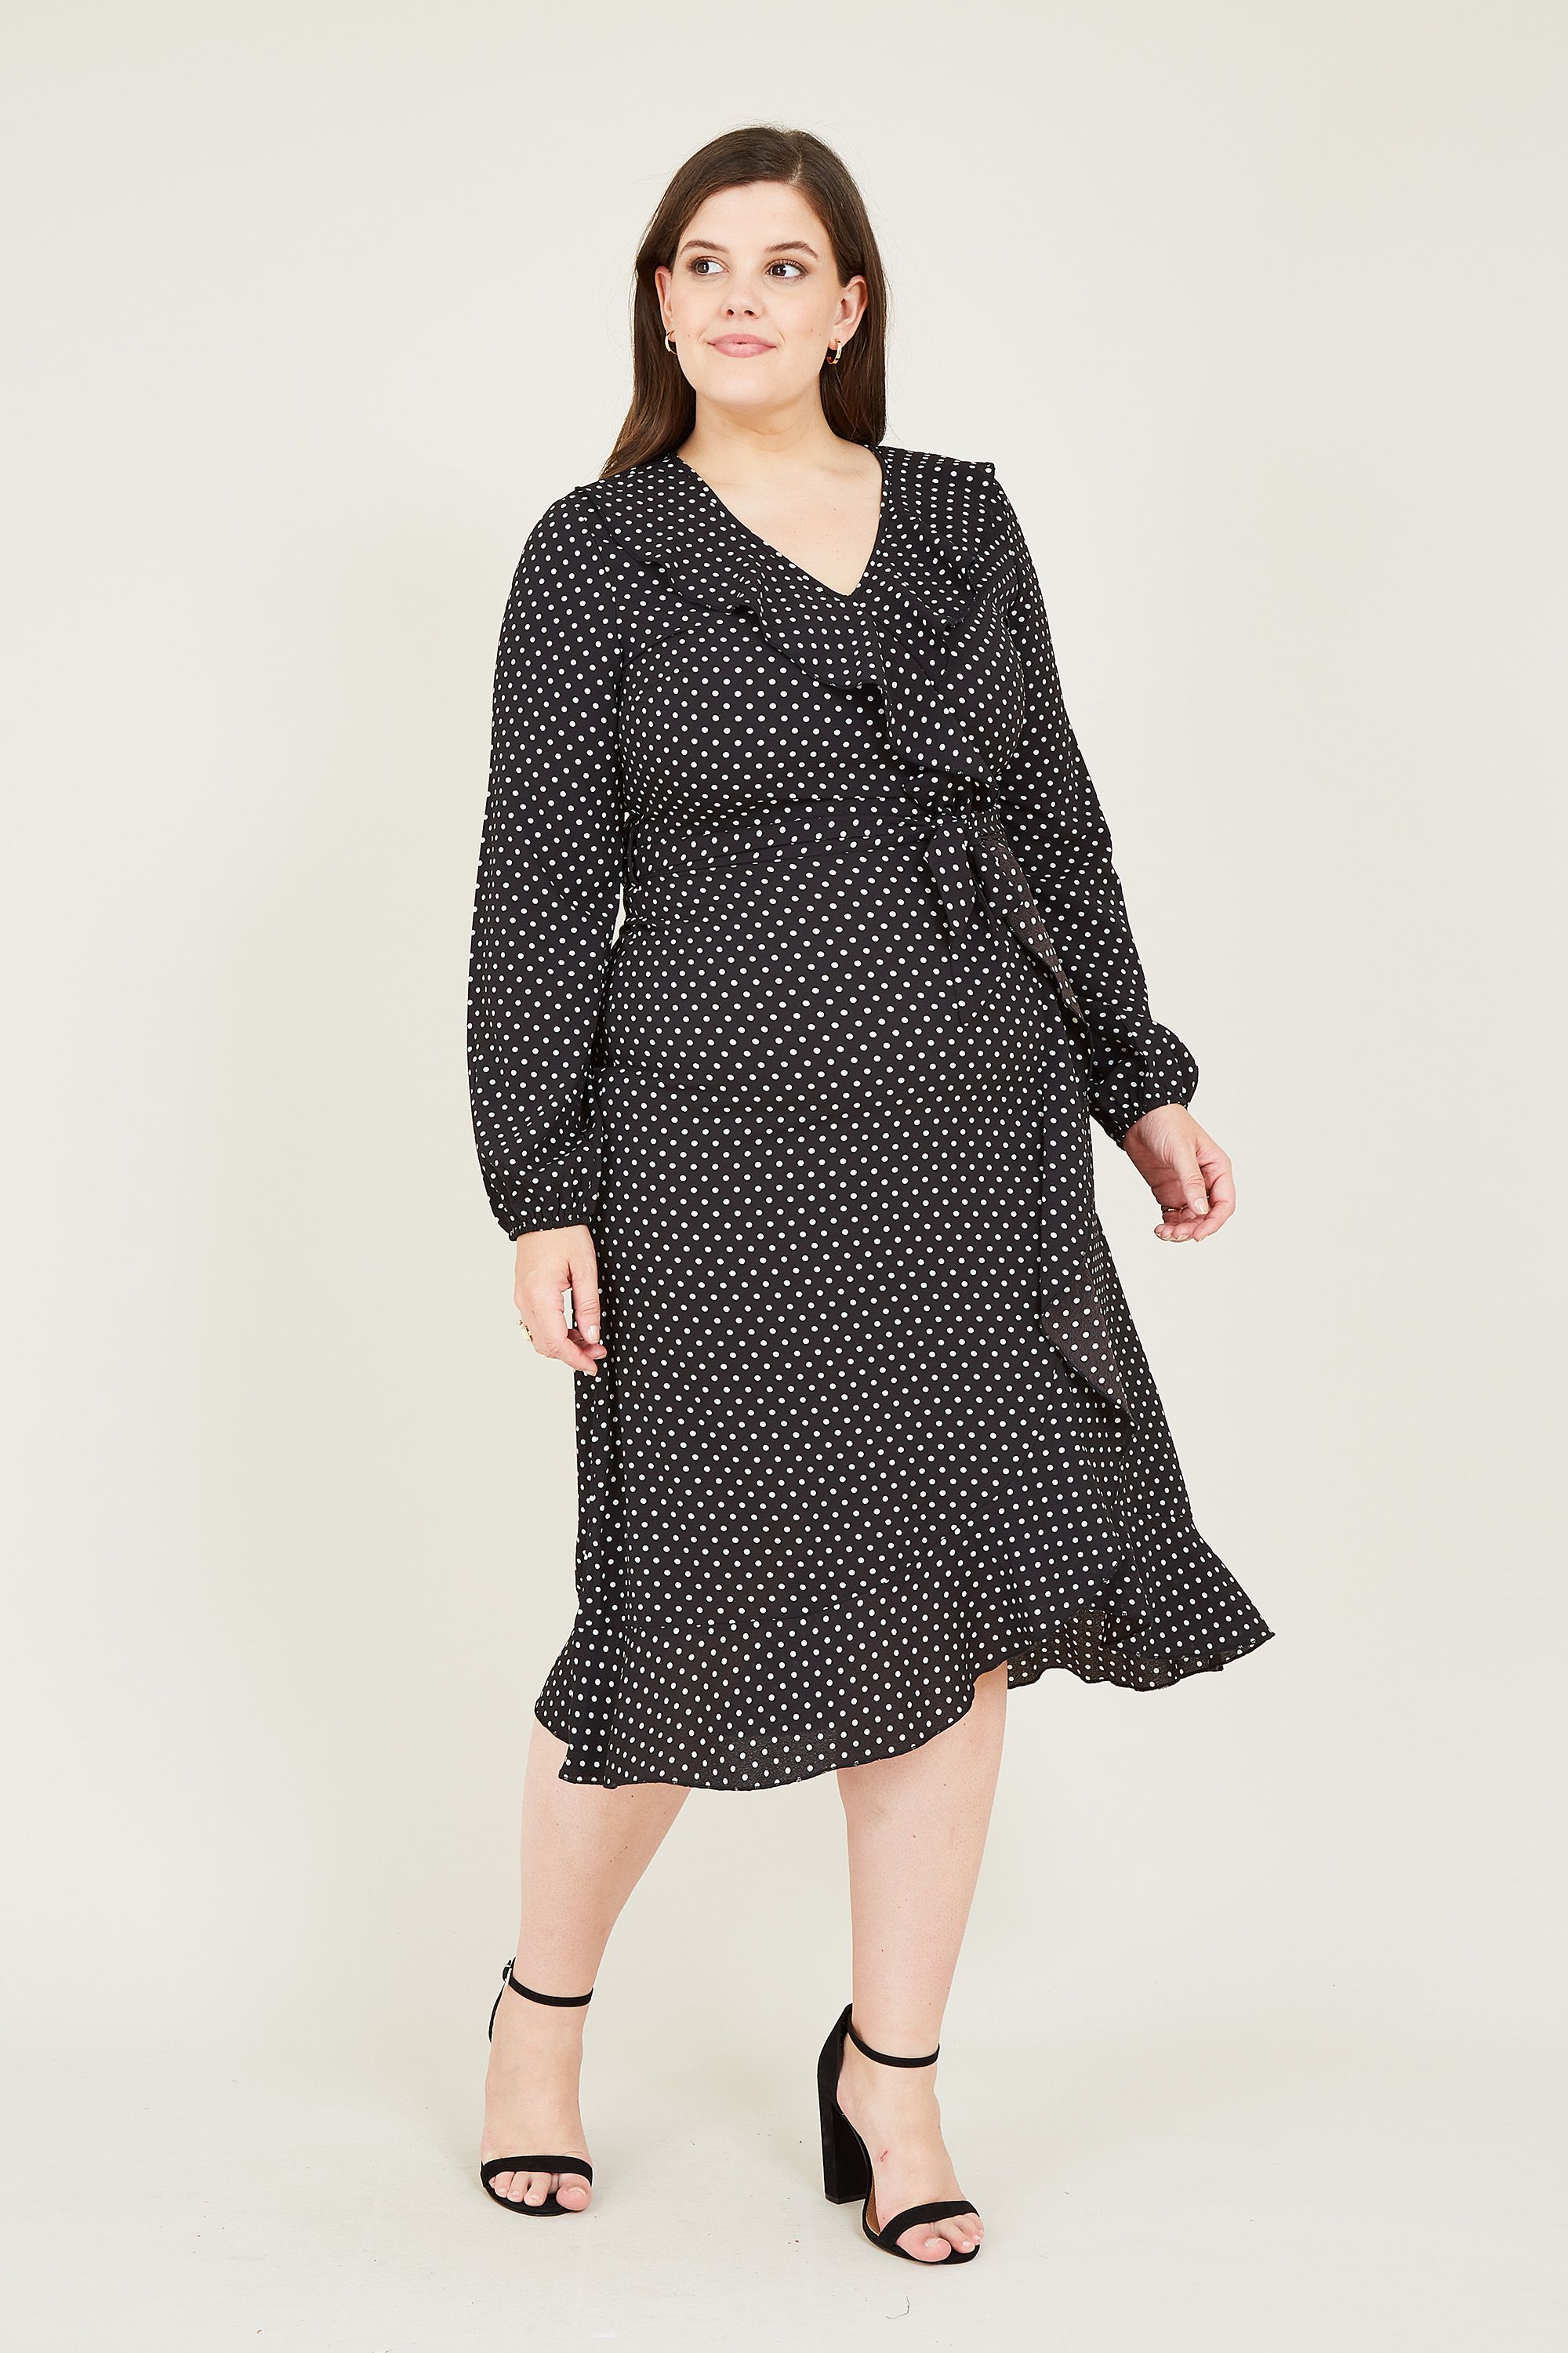 The perfect choice for weekends, this Mela Plus Size Spotted Midi Dress is a cut above the rest. Featuring a relaxed cut that cinches at the waist, soft ruffles run from the shoulders to the hem. With the light fabric making it every bit more comfortable, it's easily dressed up for fancier occasions with a pair of heels.